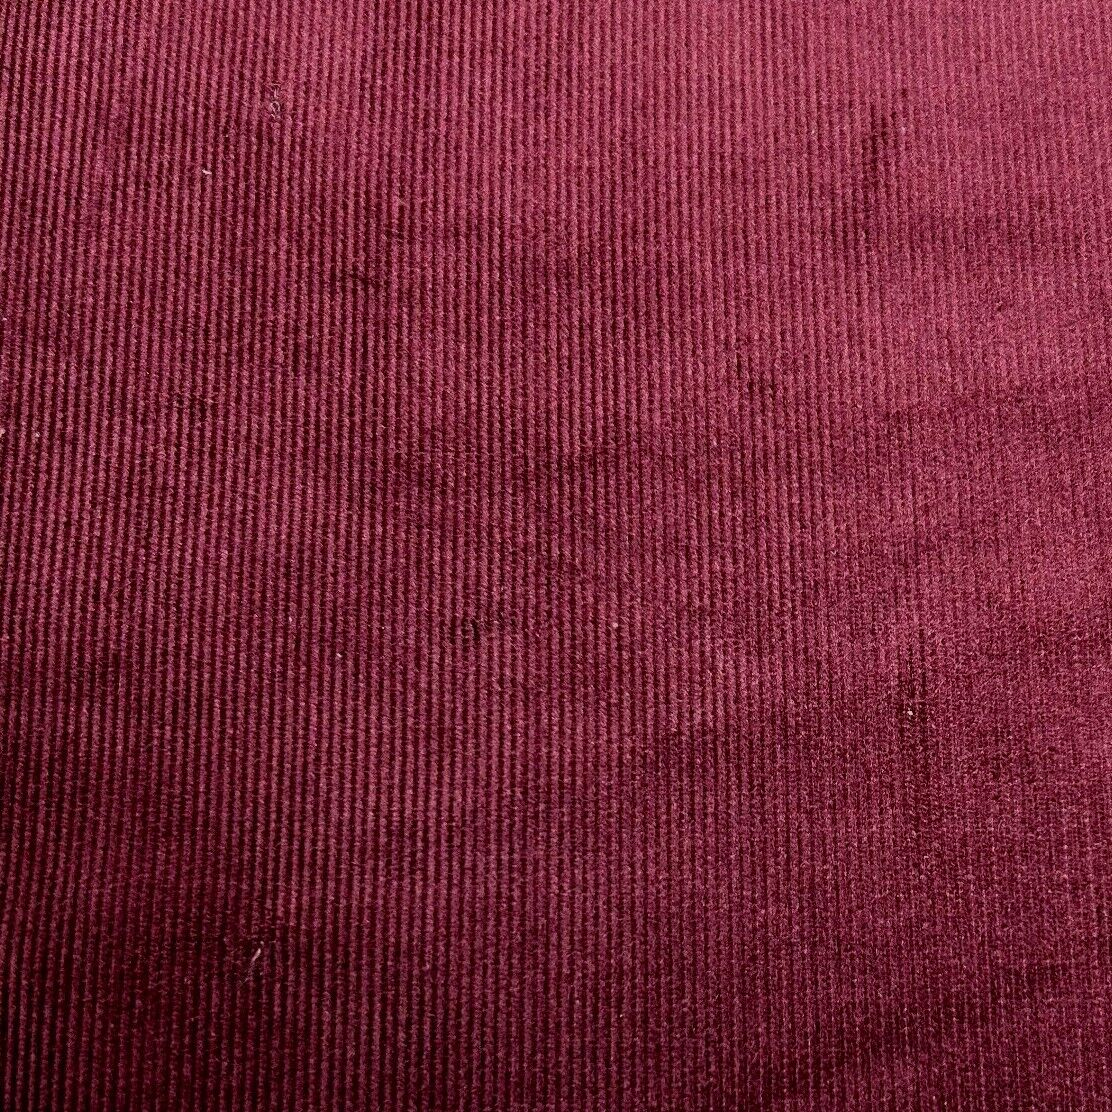 Cotton Corduroy Fabric 16 wale 55" Wide Sold By Metre